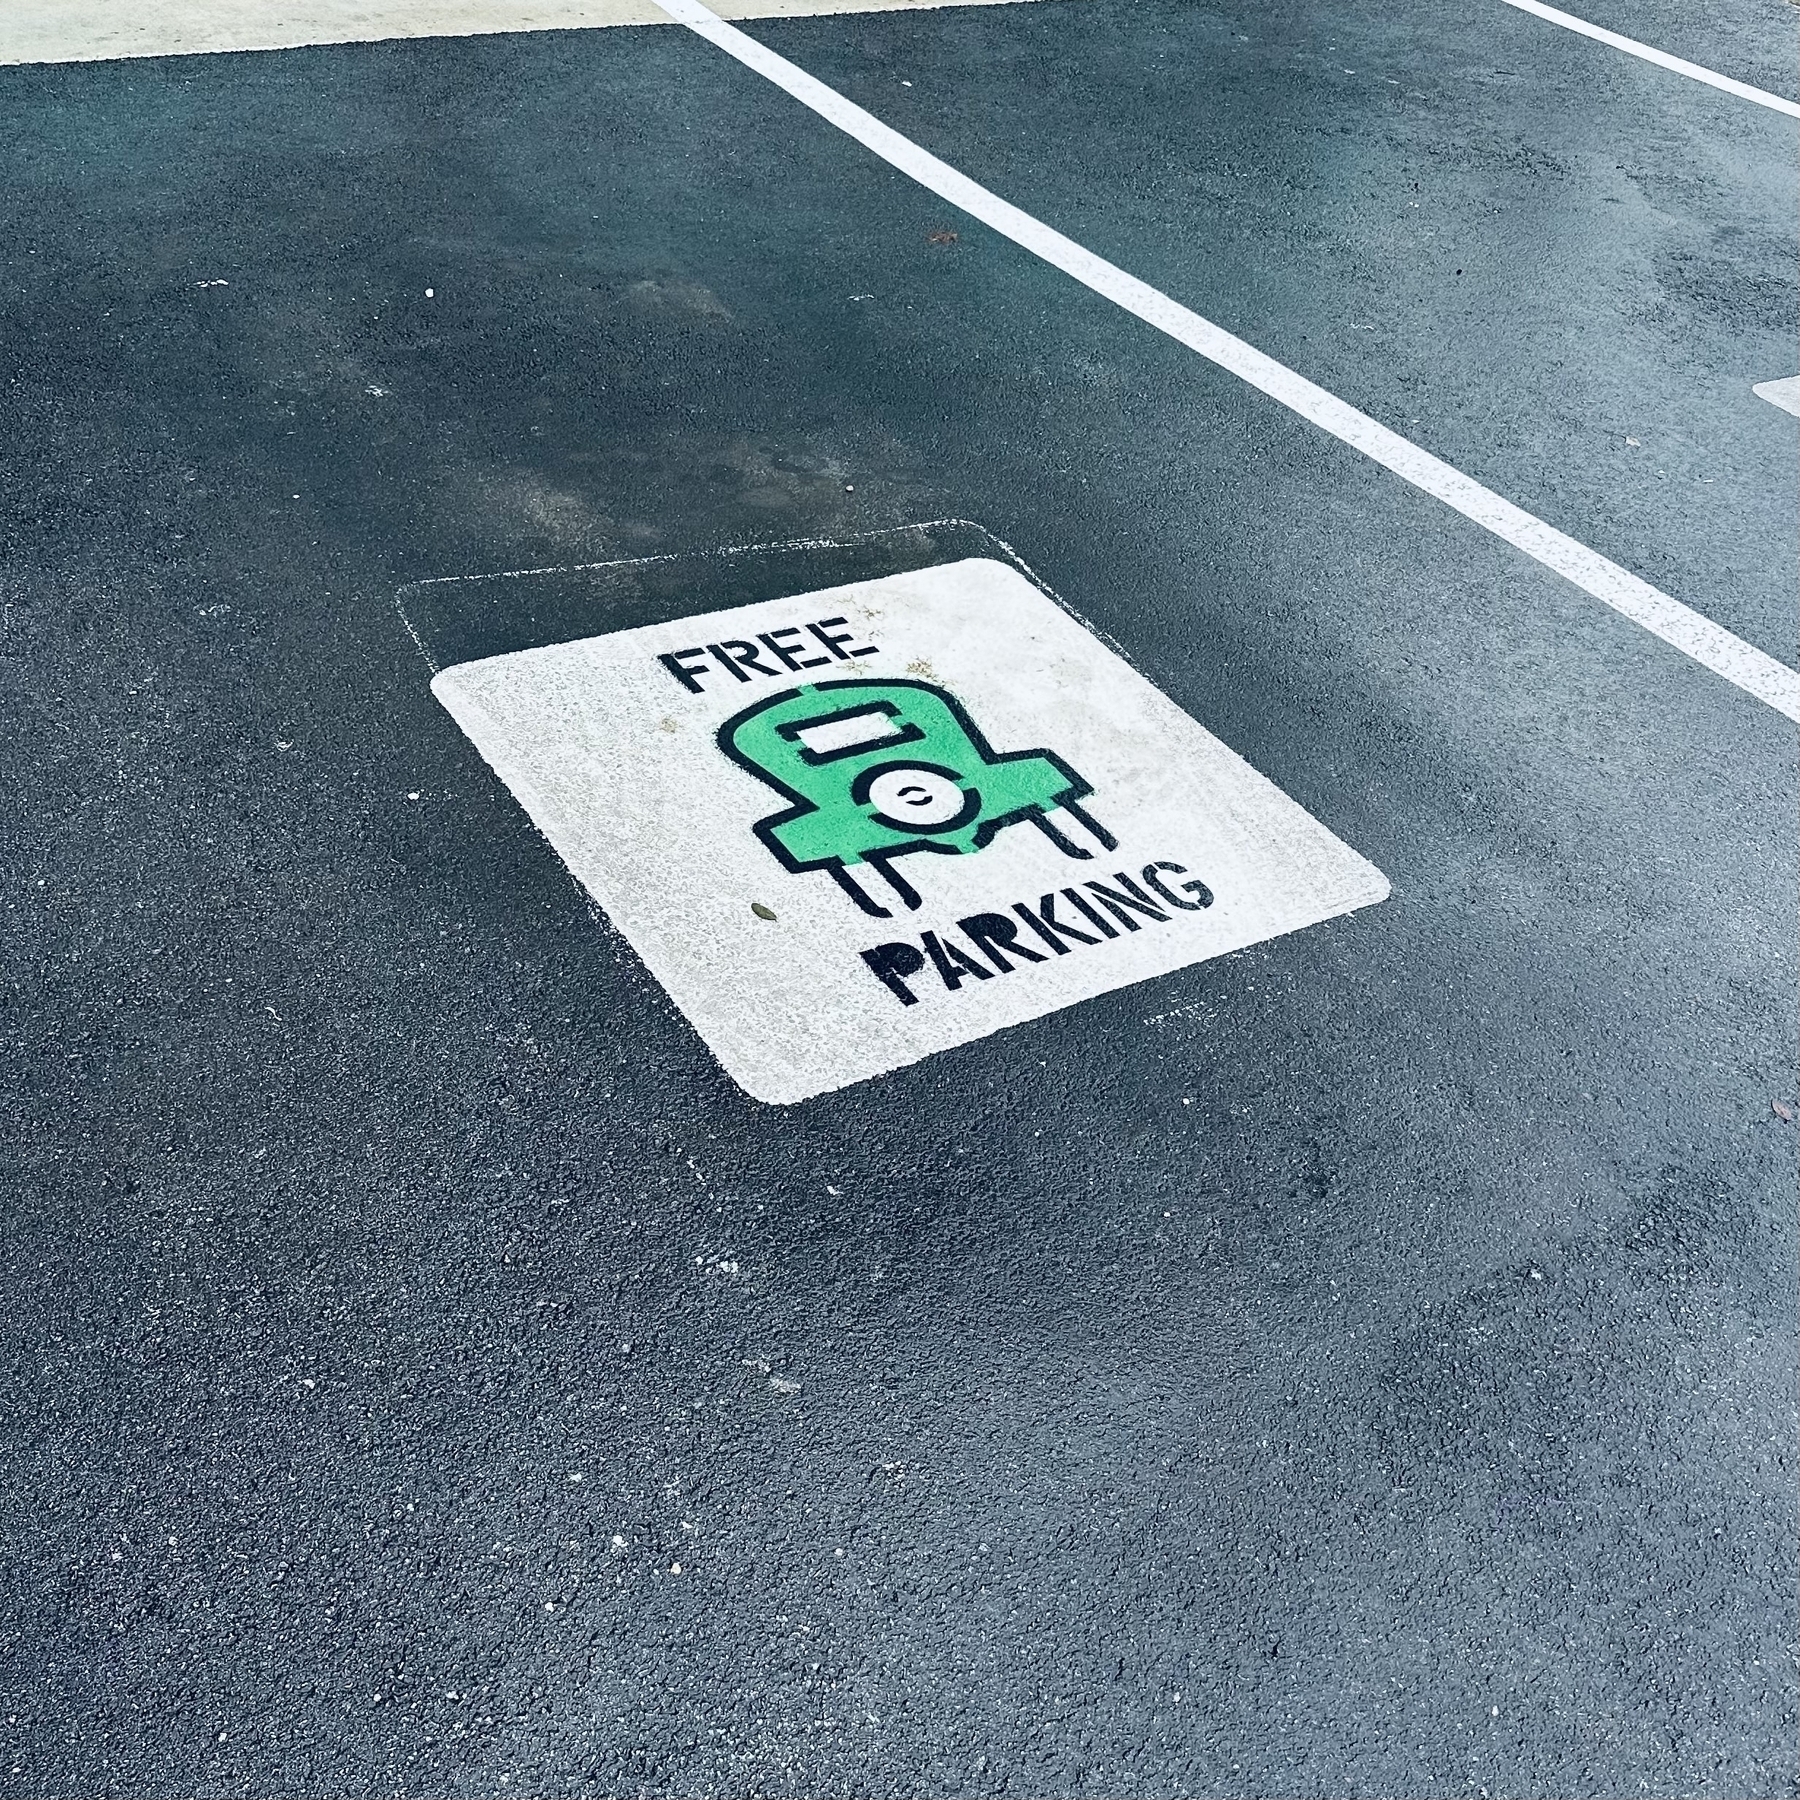 Free parking from Monopoly painted on parking space.